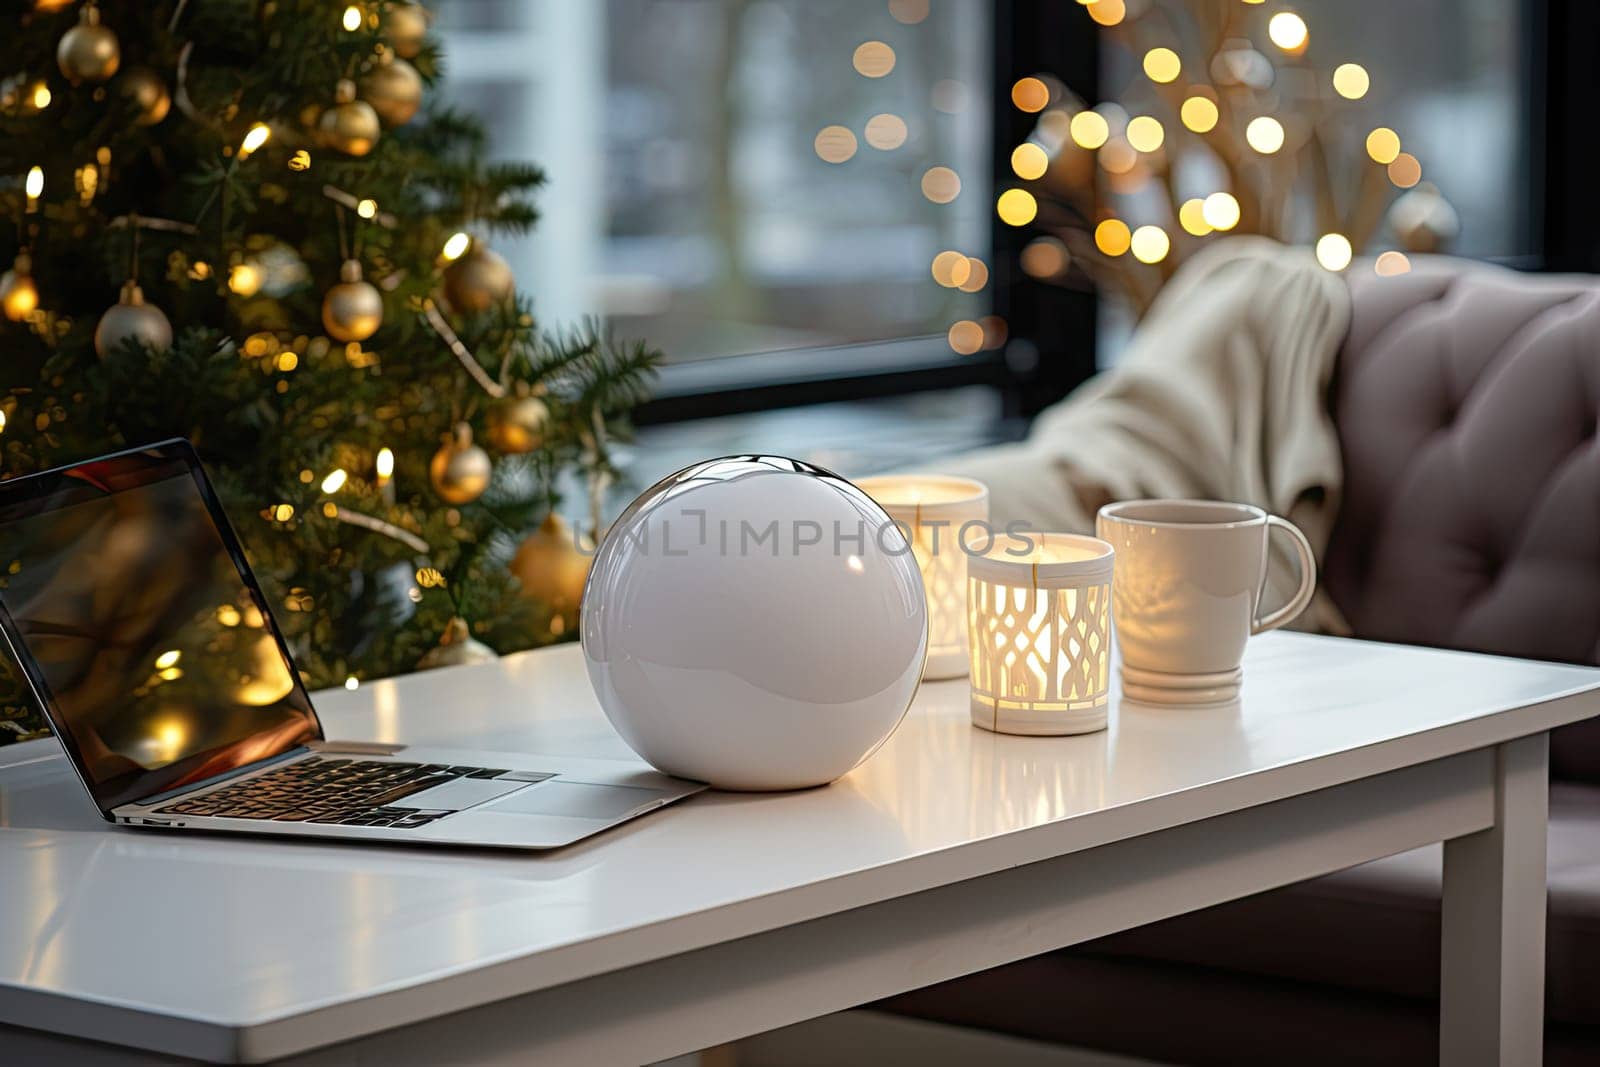 a laptop on a table next to a christmas tree with lights in the background and a cup of coffee beside